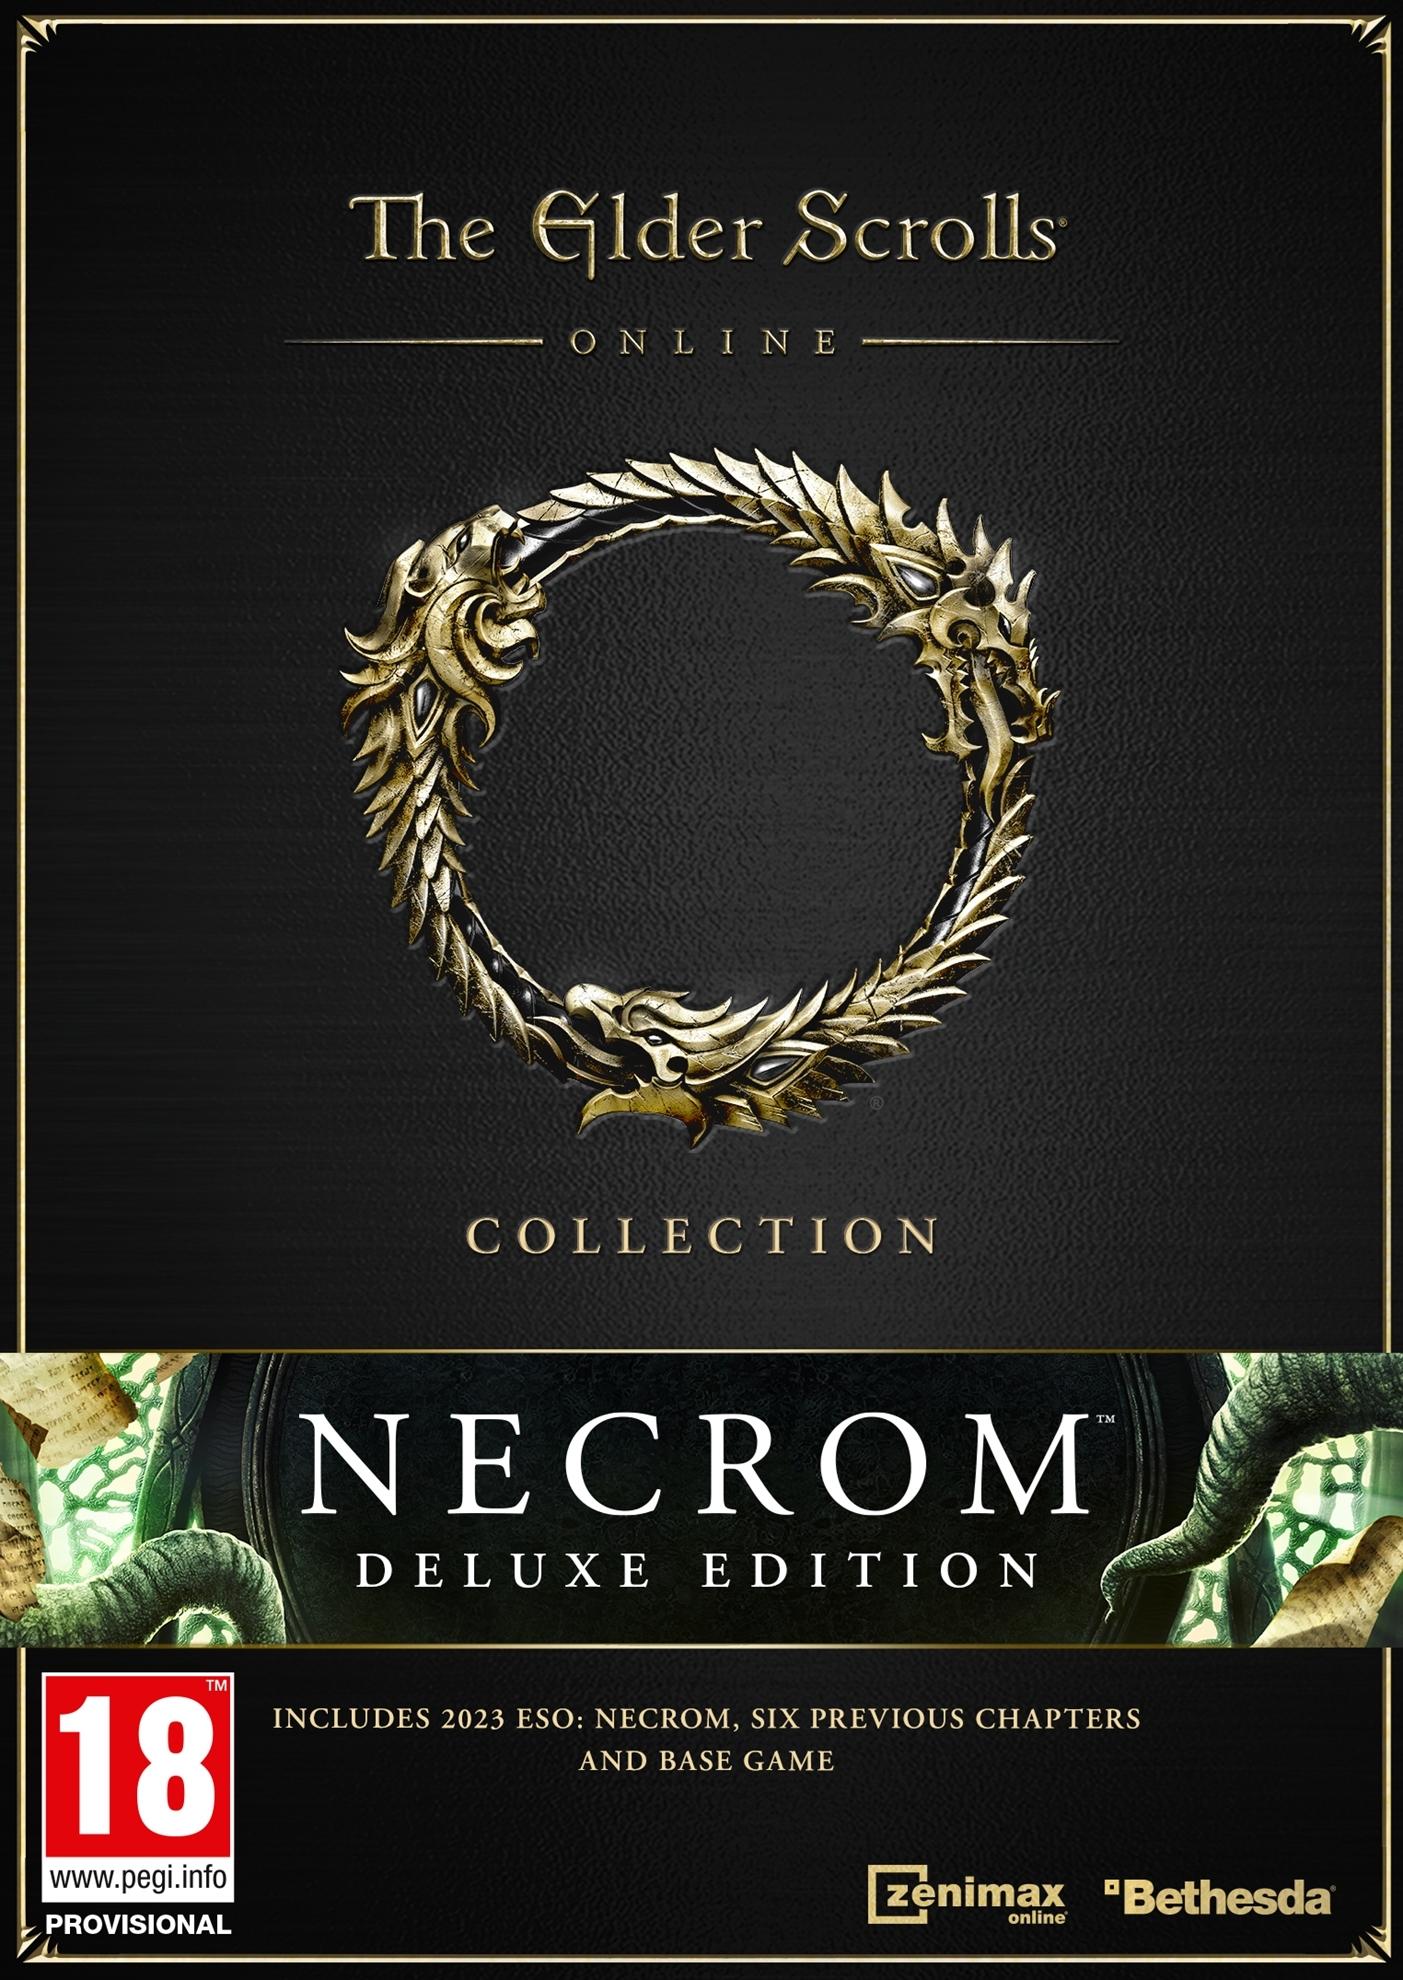 The Elder Scrolls Online Deluxe Collection: Necrom Limited Time Offer Pre Order (Elder Scrolls Online) | ROW 4 (be11575f-4e35-4365-ba5e-bf18a7b07e36)